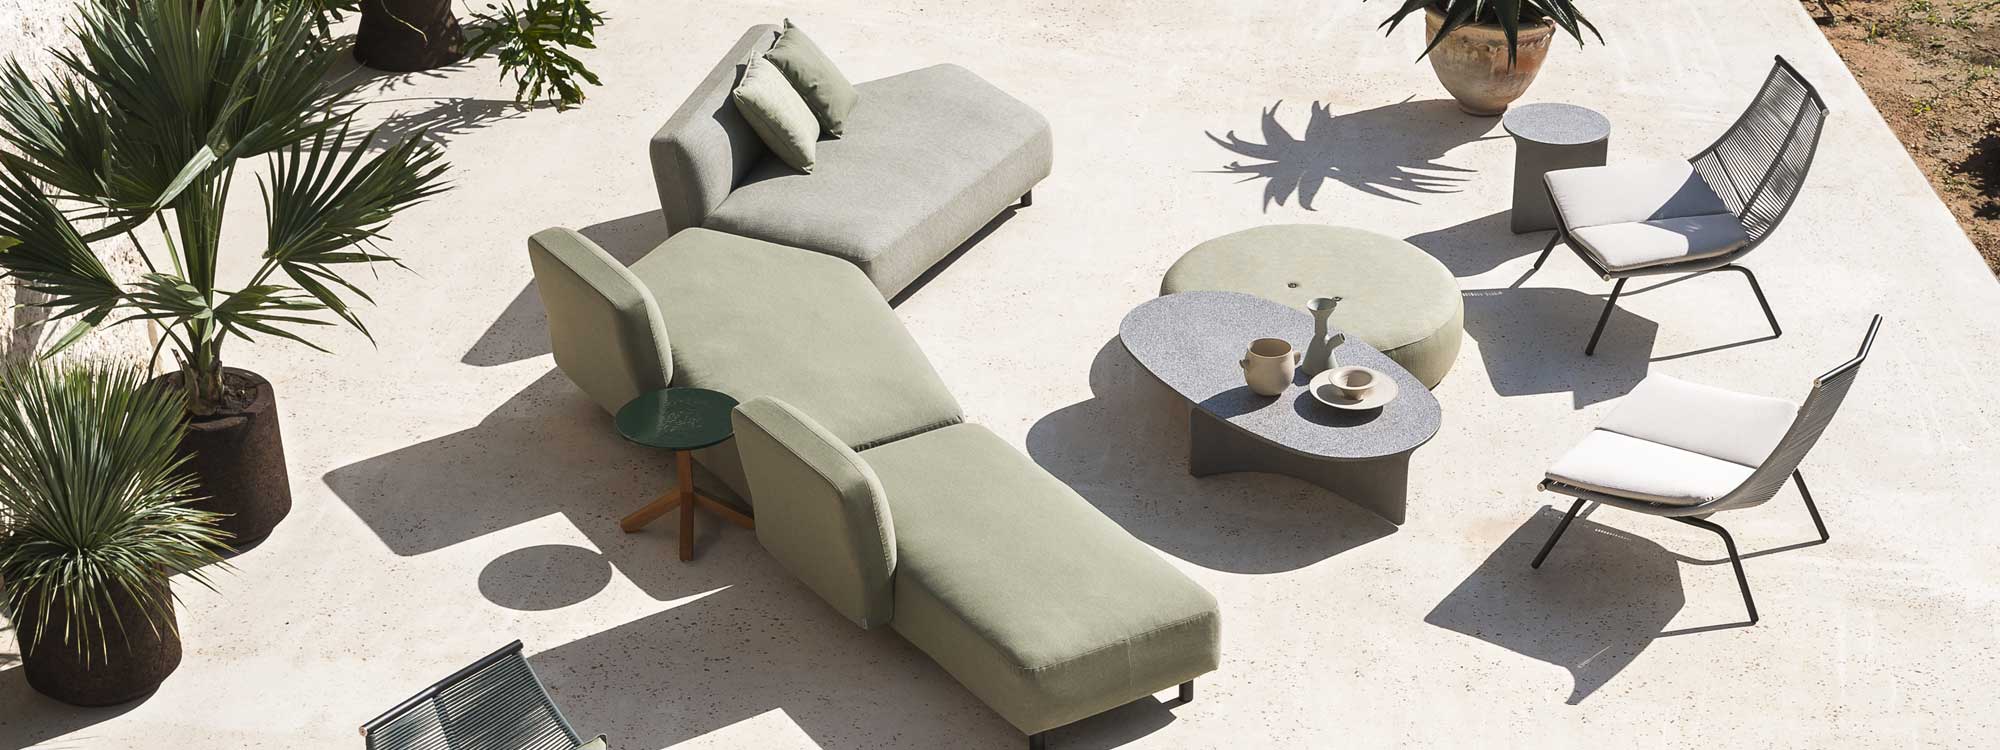 Image of RODA Mamba garden sofa with irregularly shaped lounge modules, together with Laze outdoor lounge chairs and Aspic concrete low tables